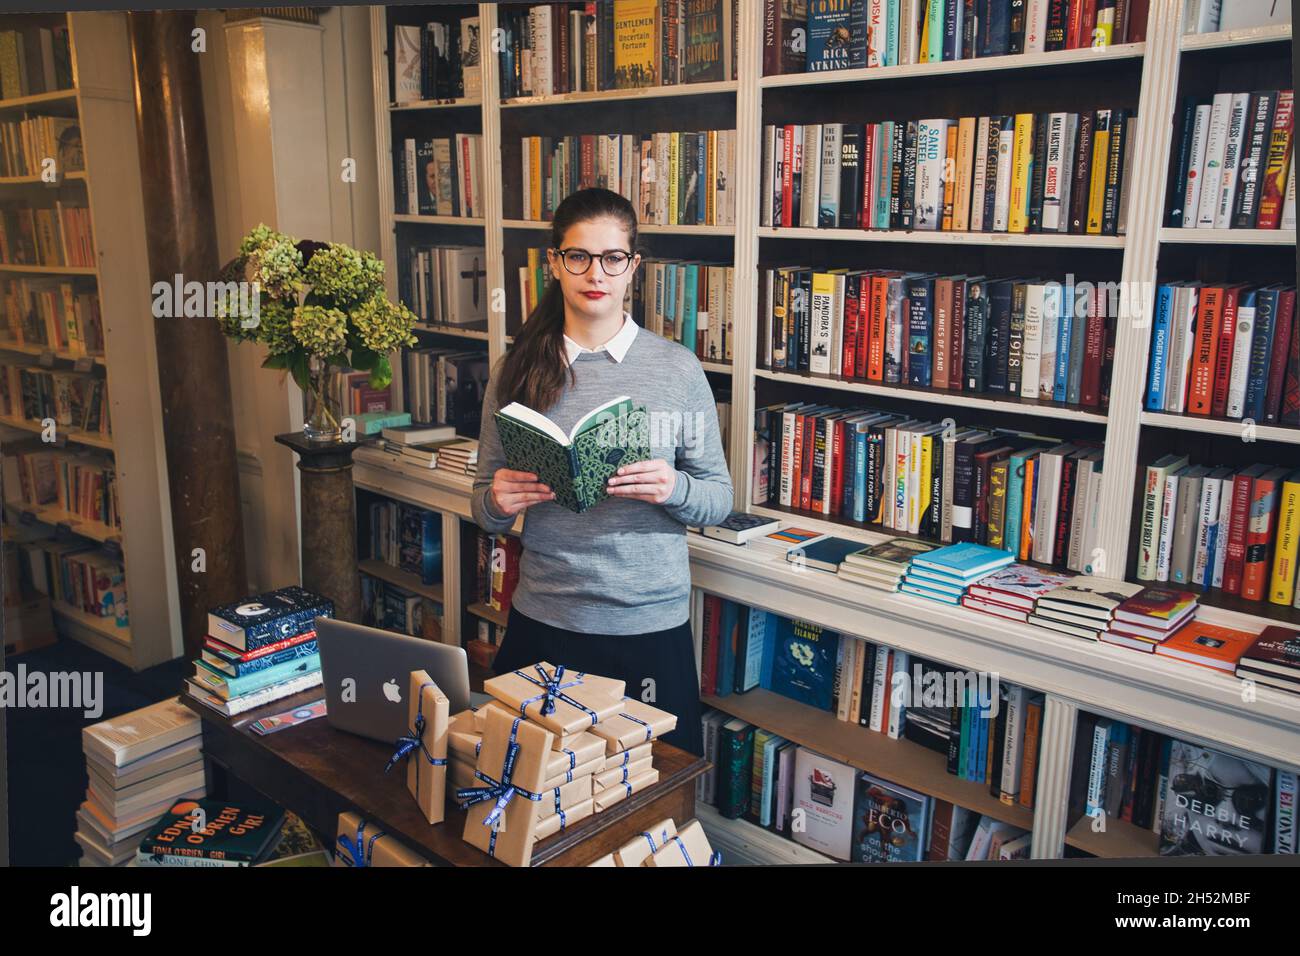 GREAT BRITAN / London / Bookstores / Beautiful woman reading a book in a bookstore. Stock Photo